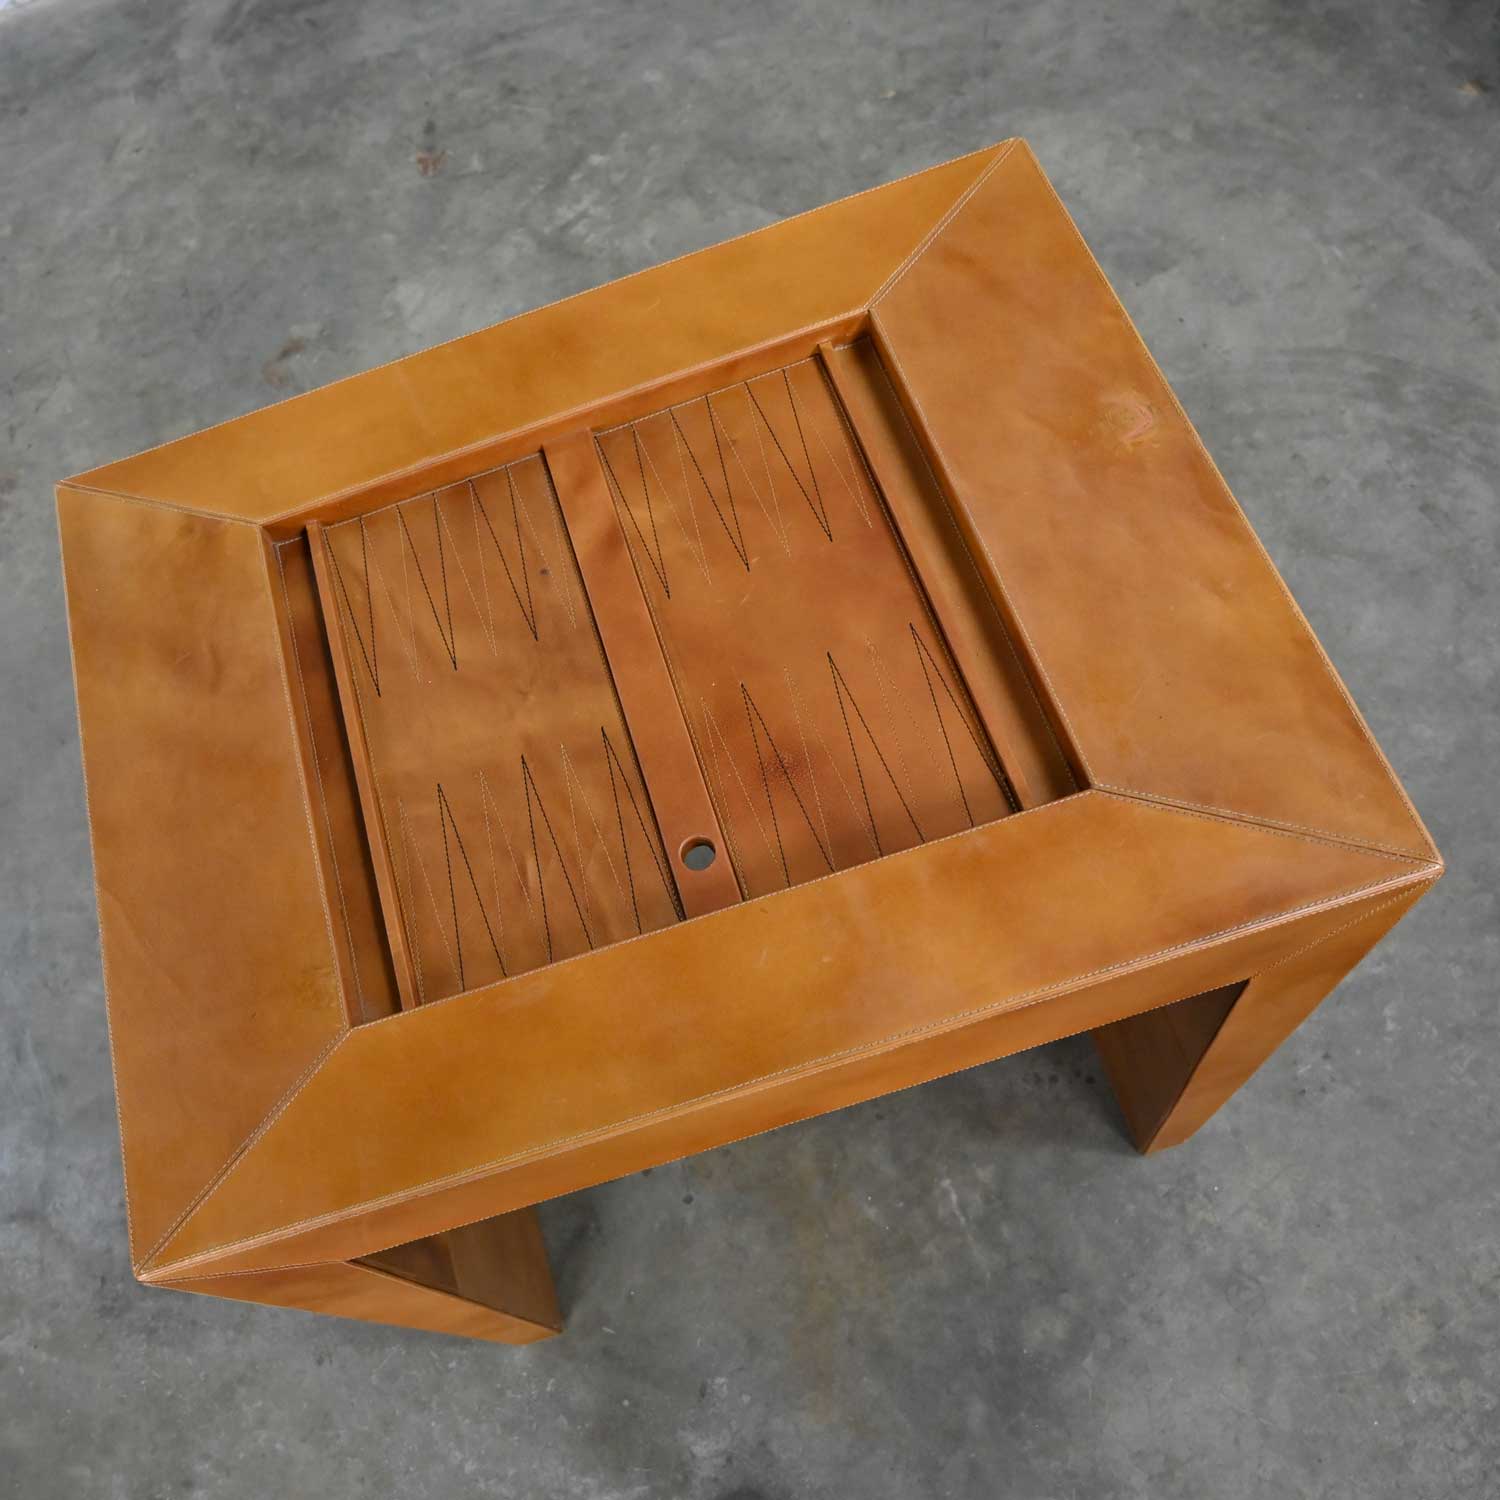 Modern to Post Modern Cognac Leather Game Table with Angled Legs from India